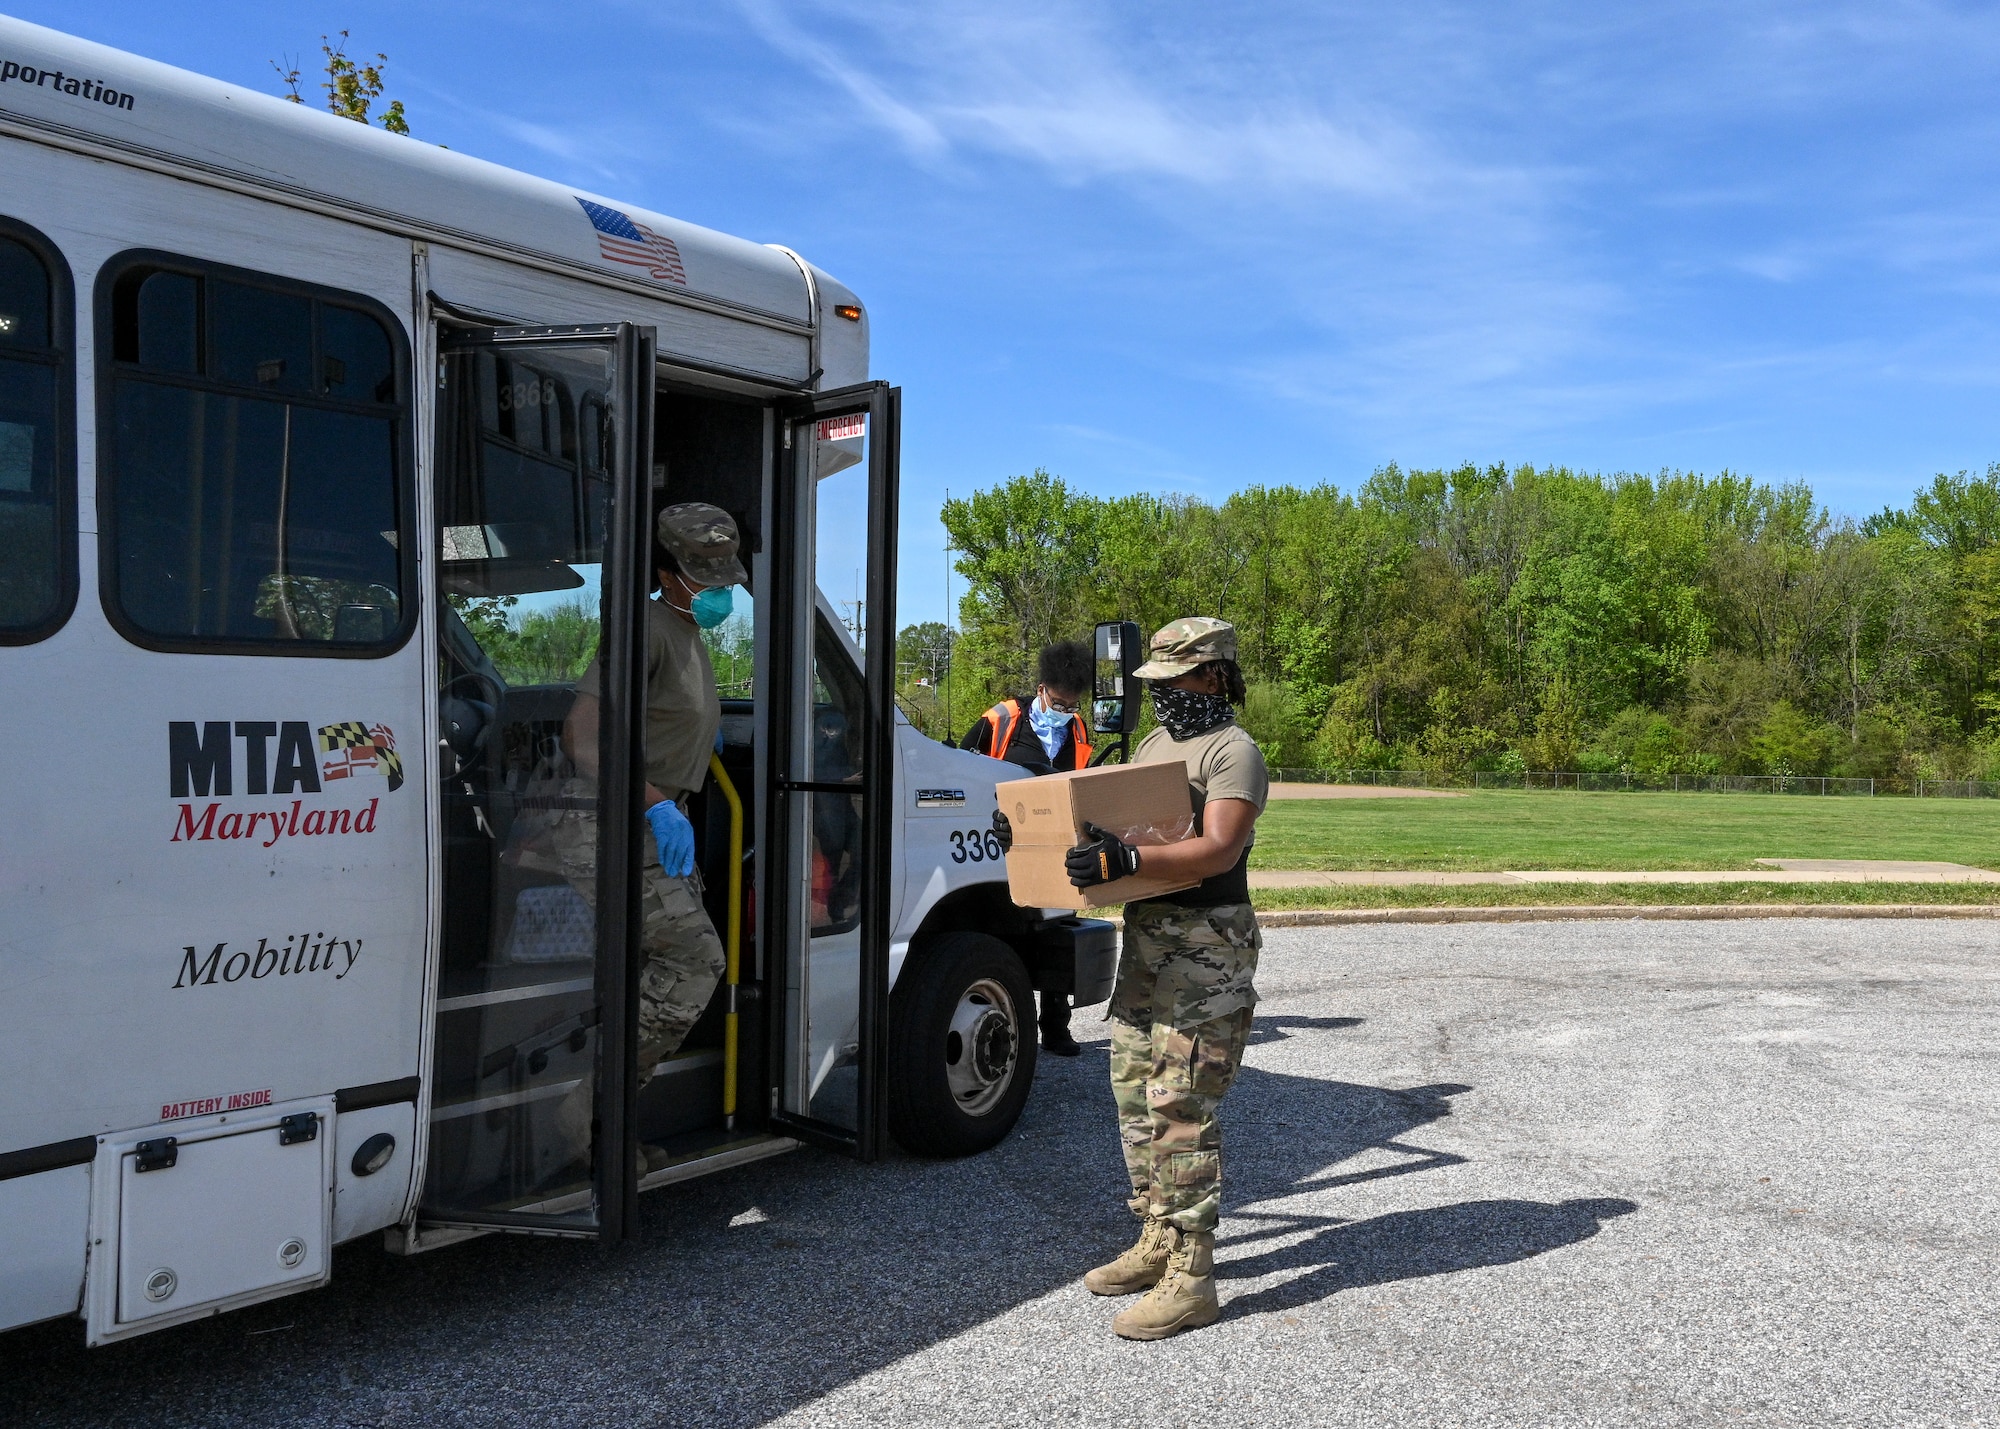 Members of the Maryland Air National Guard place boxes of groceries on a Maryland Transportation Mobility bus for a member of the community while supporting efforts by the Maryland Food Bank and Baltimore County Department of Parks and Recreation to distribute meals and groceries at the Mars Estates Police Athletic League center in Essex, Md., May 2, 2020. The mission helps food insecure citizens have enough while schools and work places are closed. (U.S. Air National Guard photo by Tech. Sgt. Enjoli Saunders)